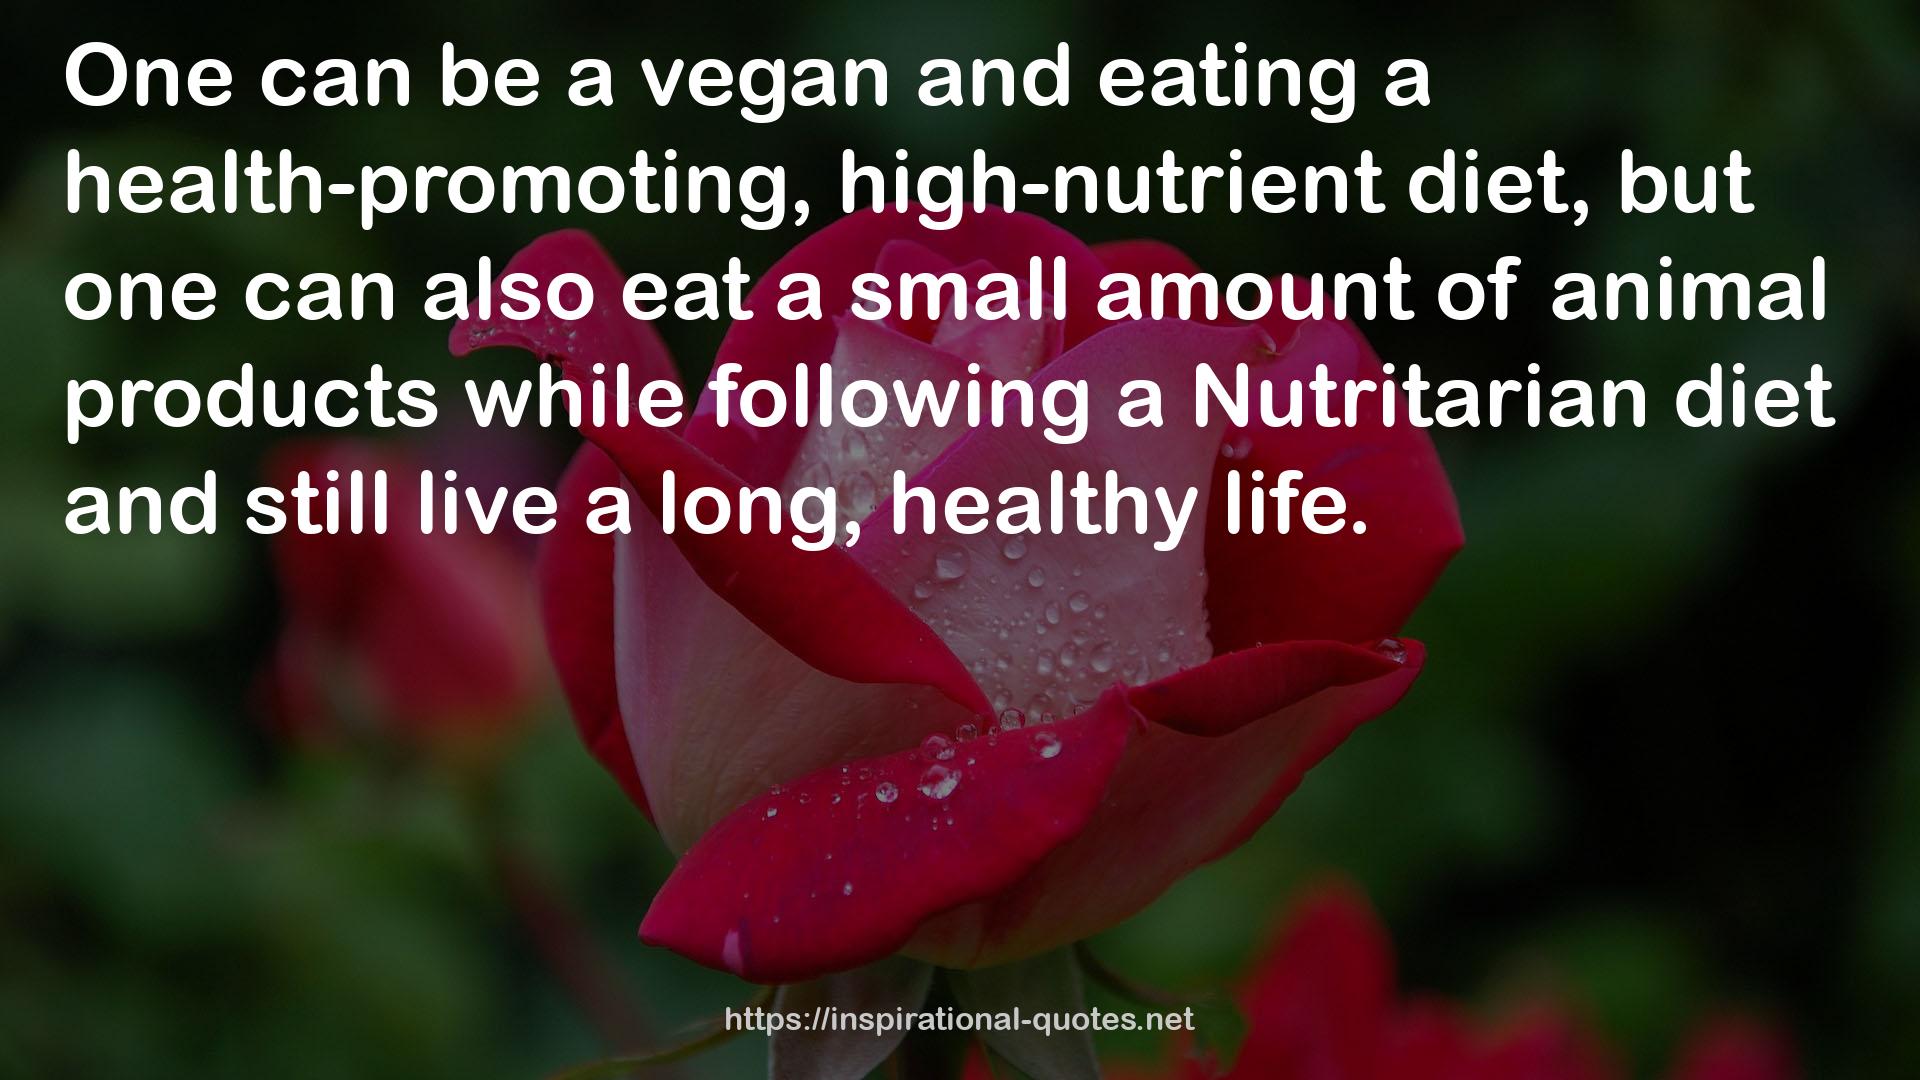 a Nutritarian diet  QUOTES